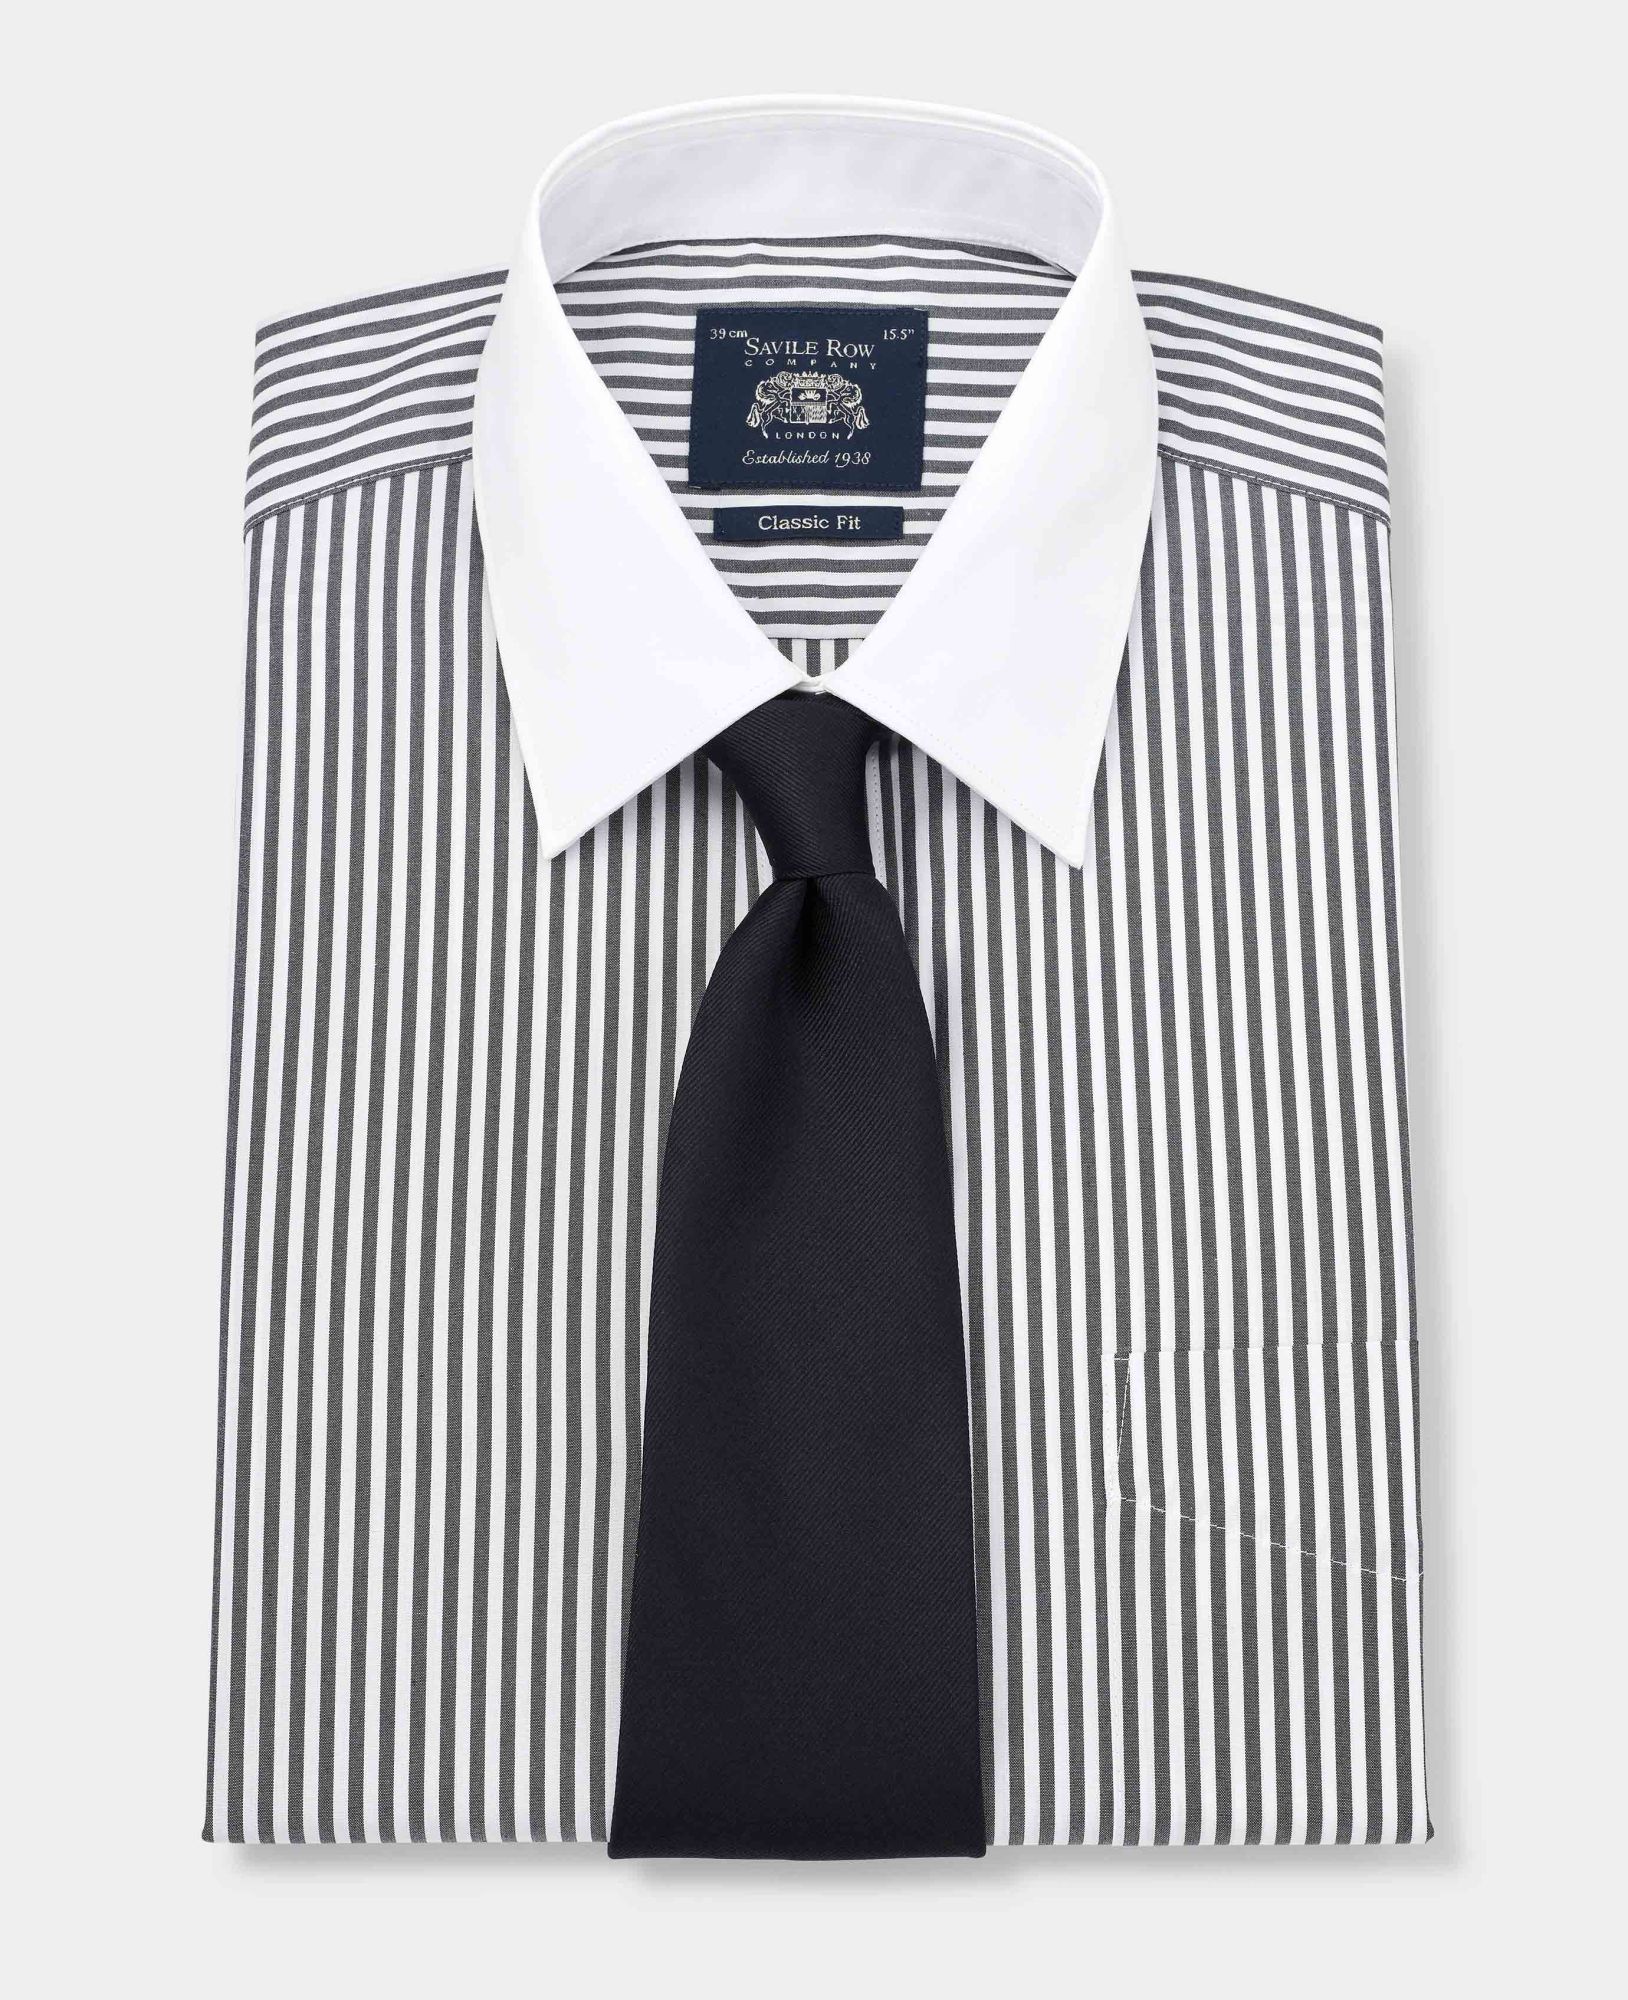 Black Stripe Classic Fit Contrast Collar Shirt With White Collar & Cuffs 20